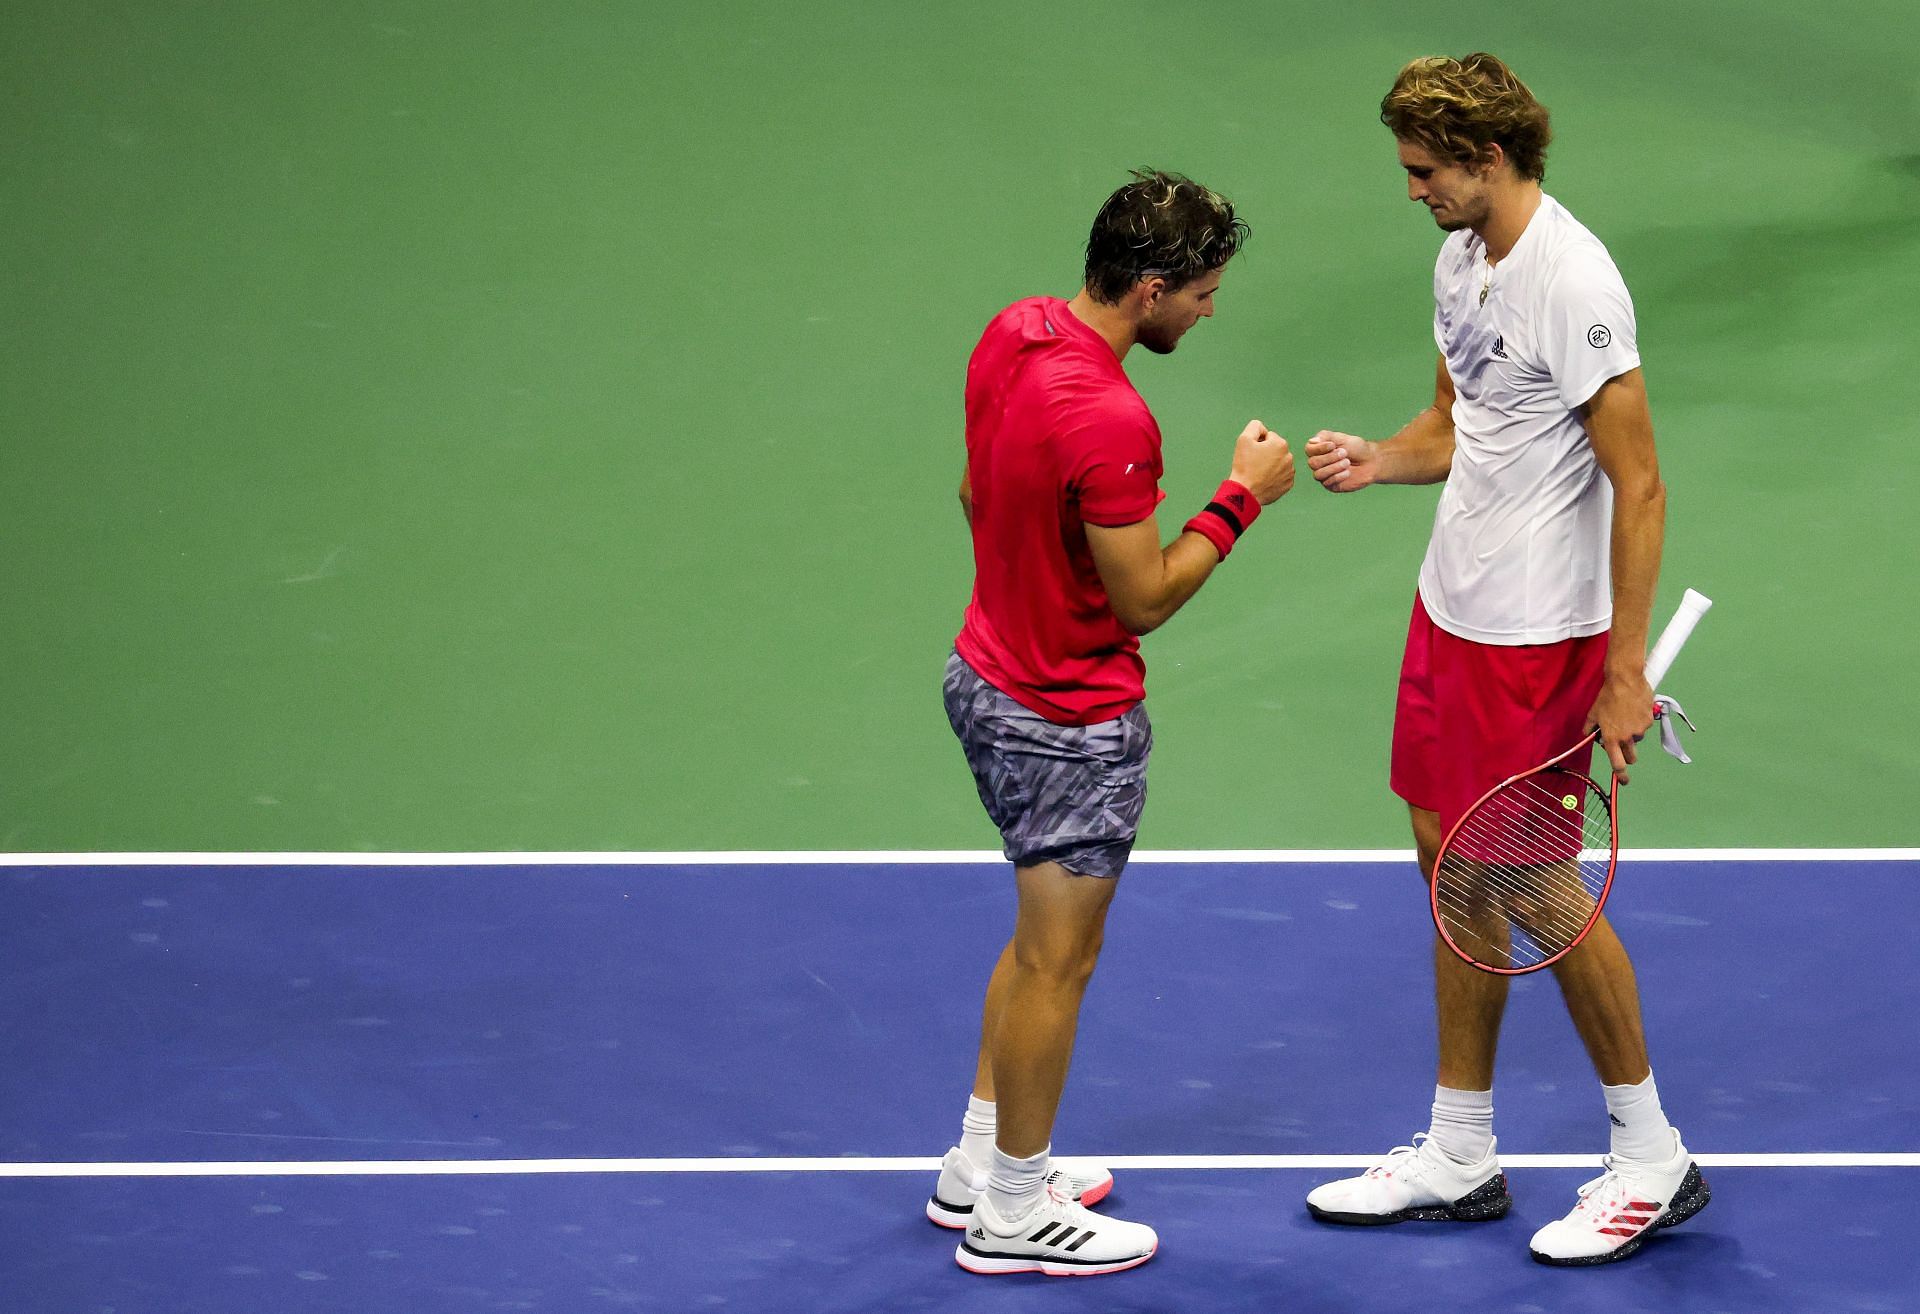 Dominic Thiem and Alexander Zverev at the 2020 US Open - Day 14